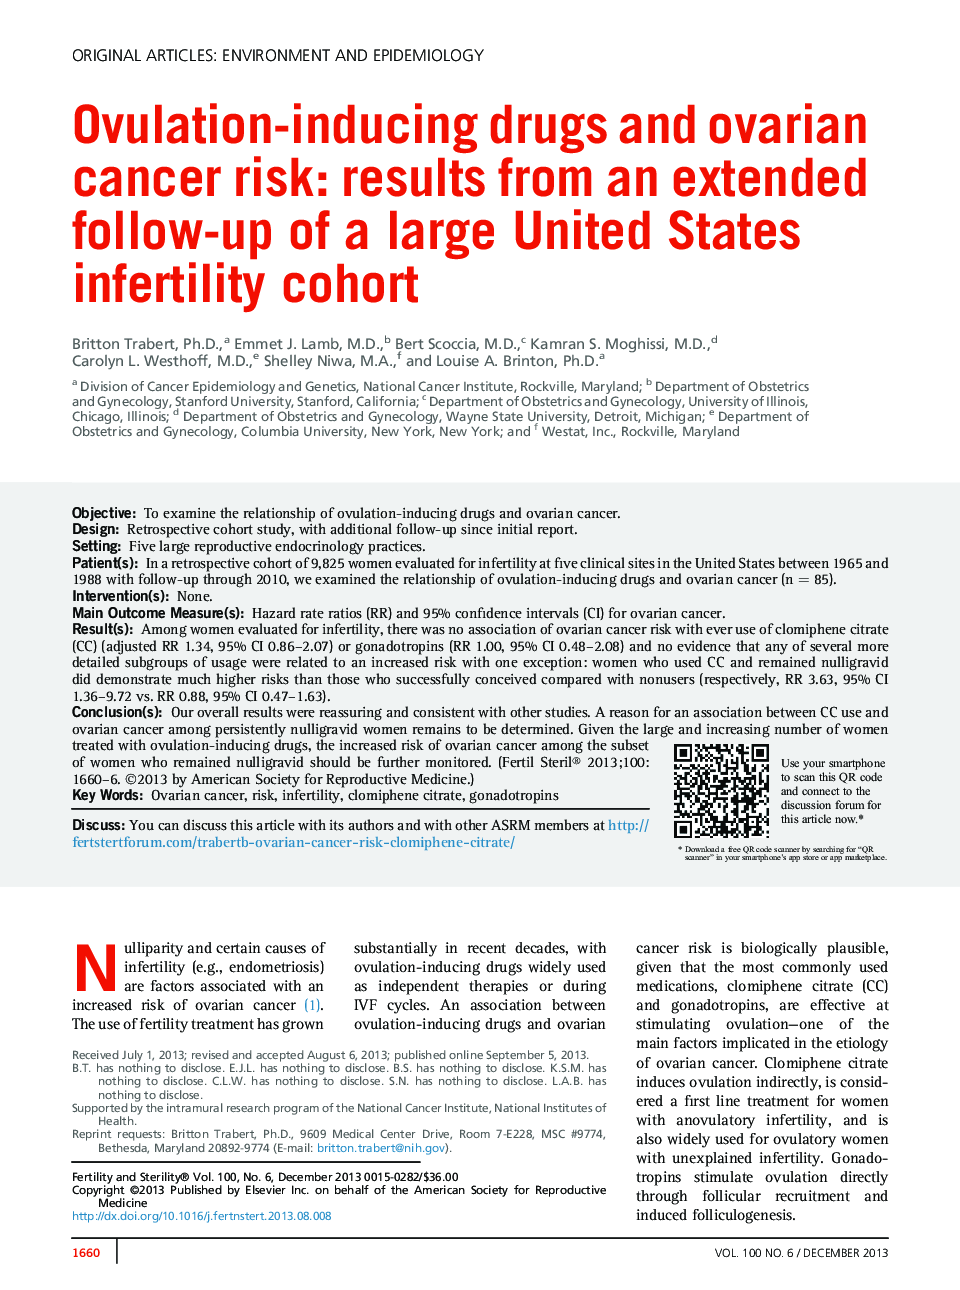 Ovulation-inducing drugs and ovarian cancer risk: results from an extended follow-up of a large United States infertility cohort 